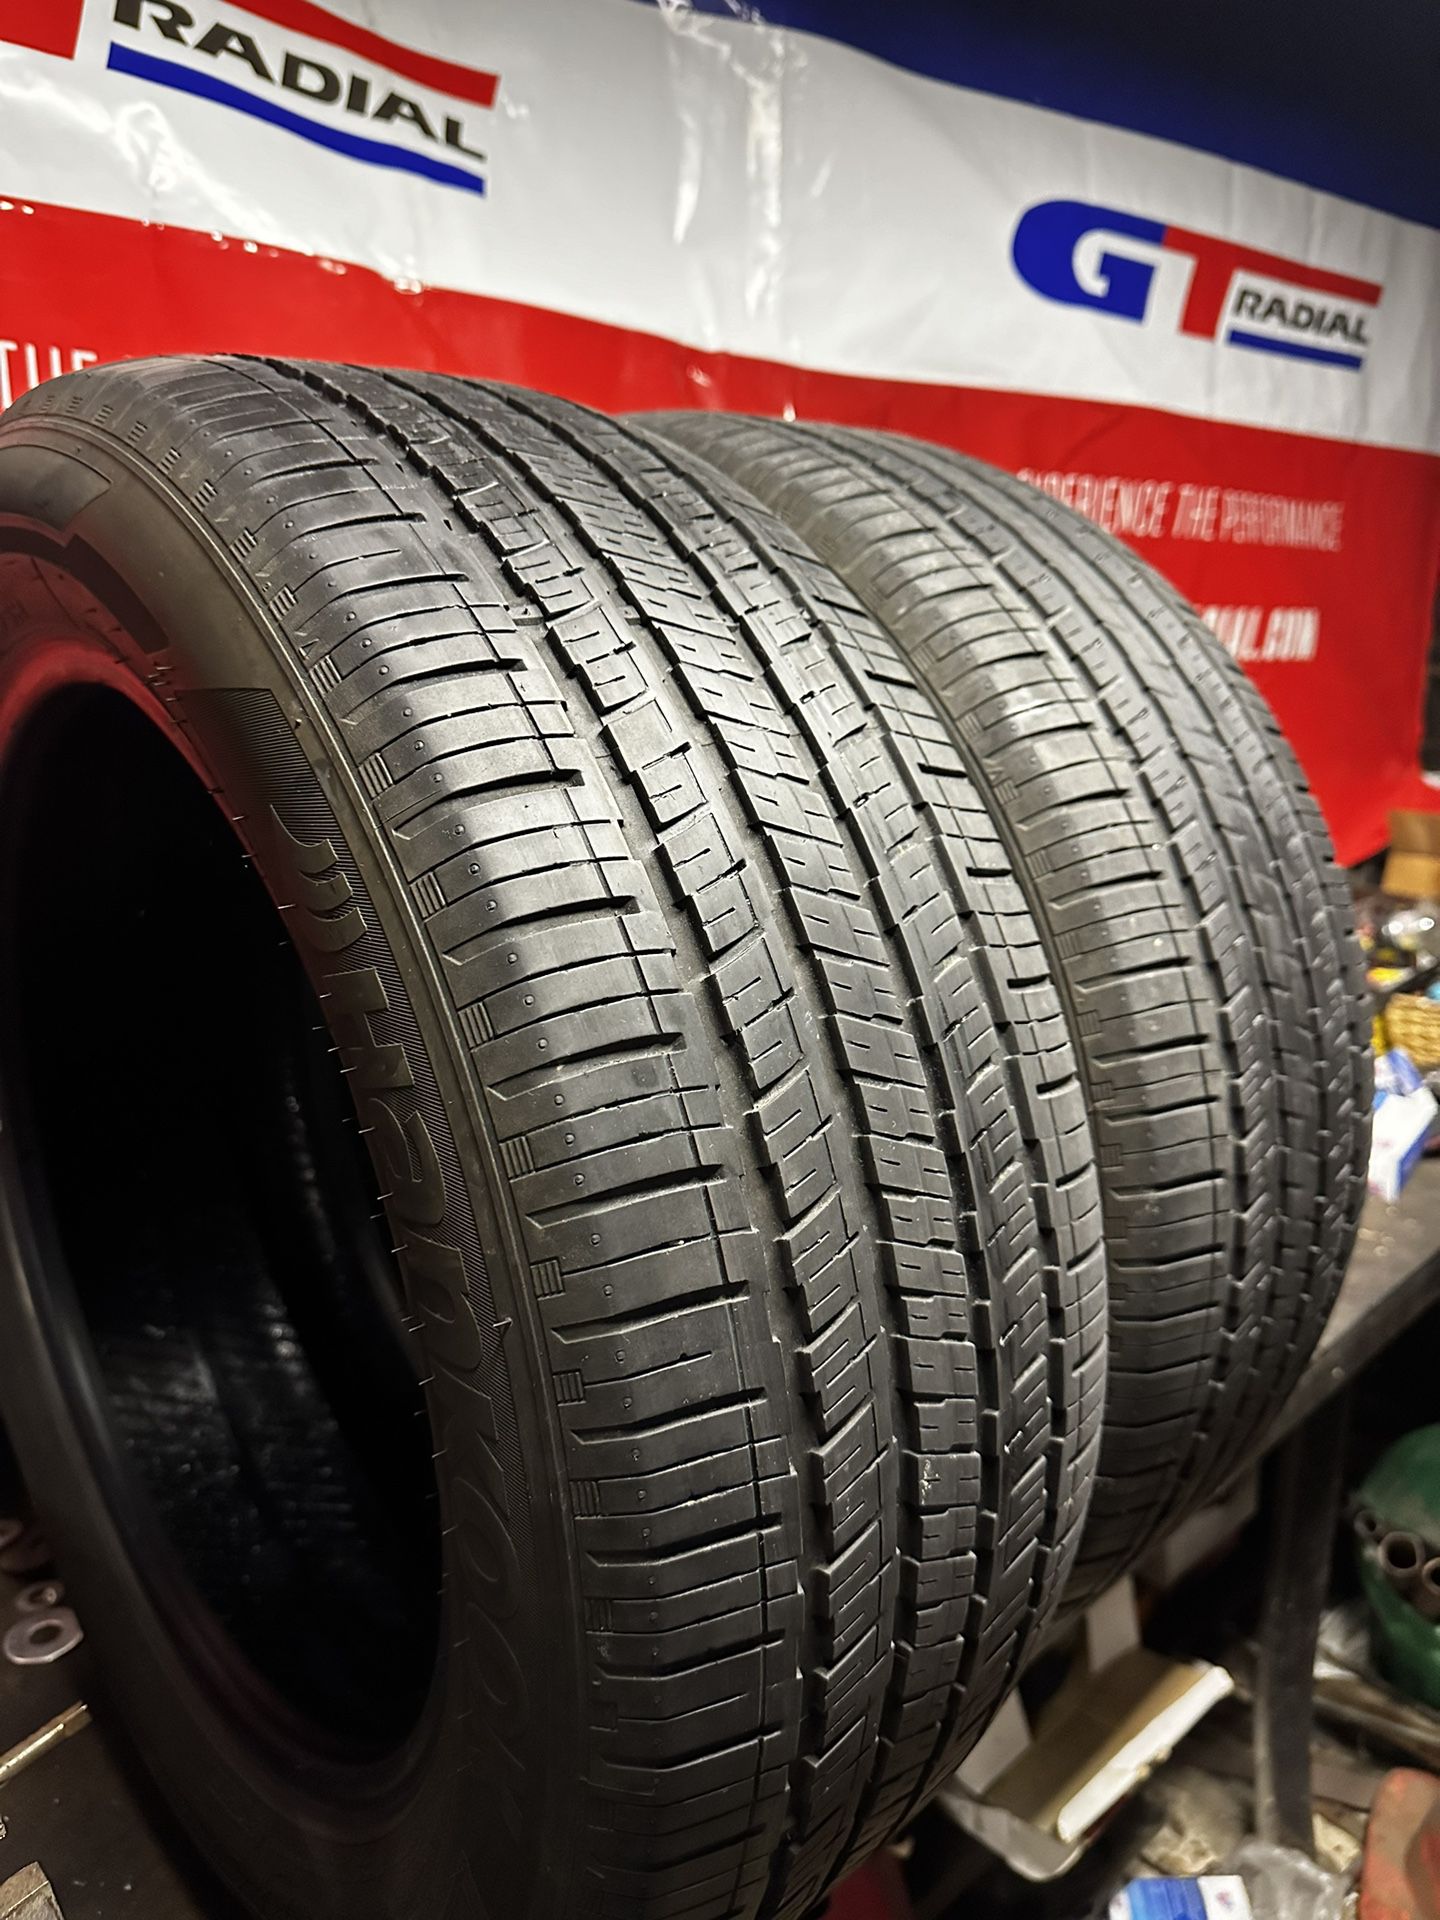 Hankook Tires 225/55R 17 Great Condition Two Tires For $60